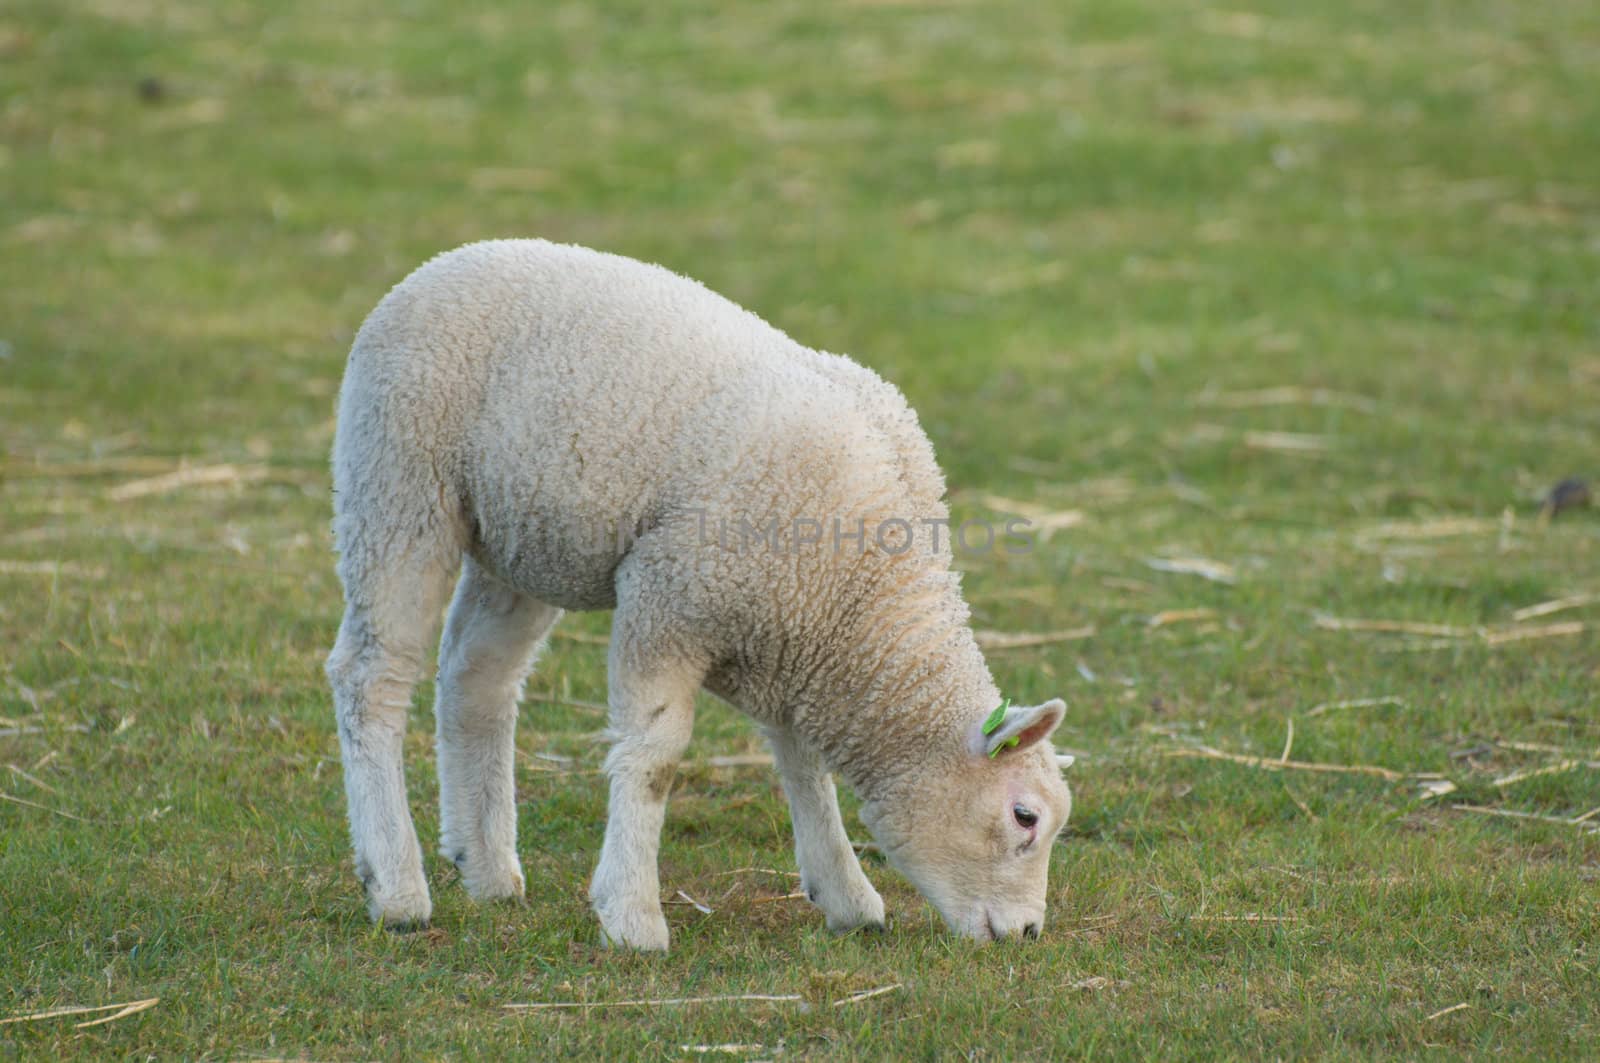 A lamb in a meadow eating grass